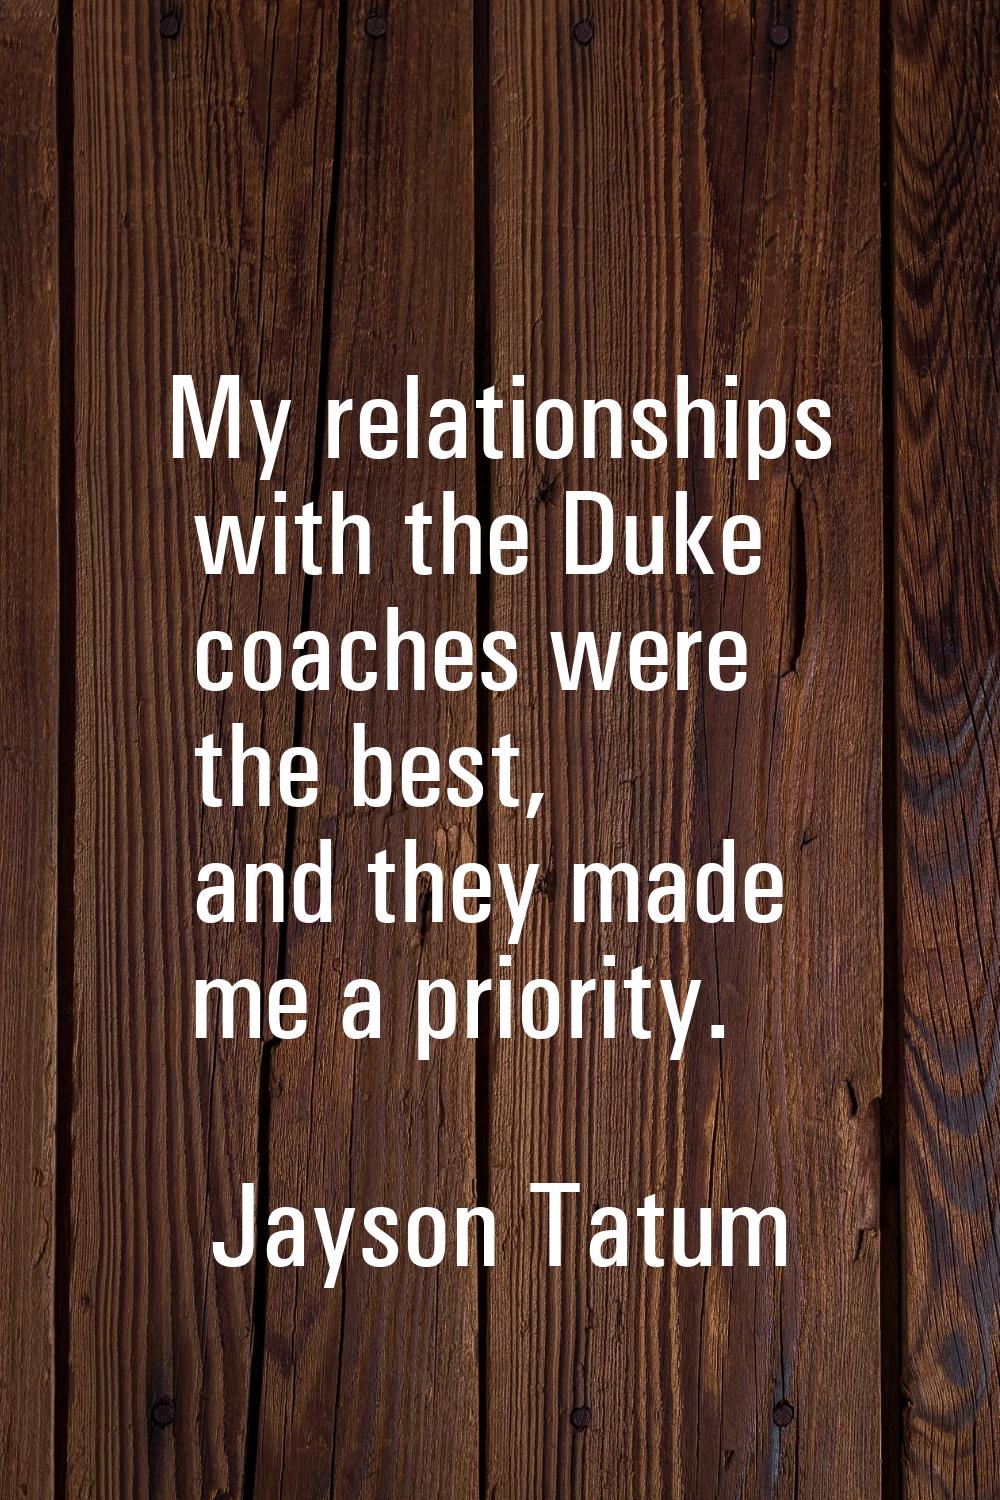 My relationships with the Duke coaches were the best, and they made me a priority.